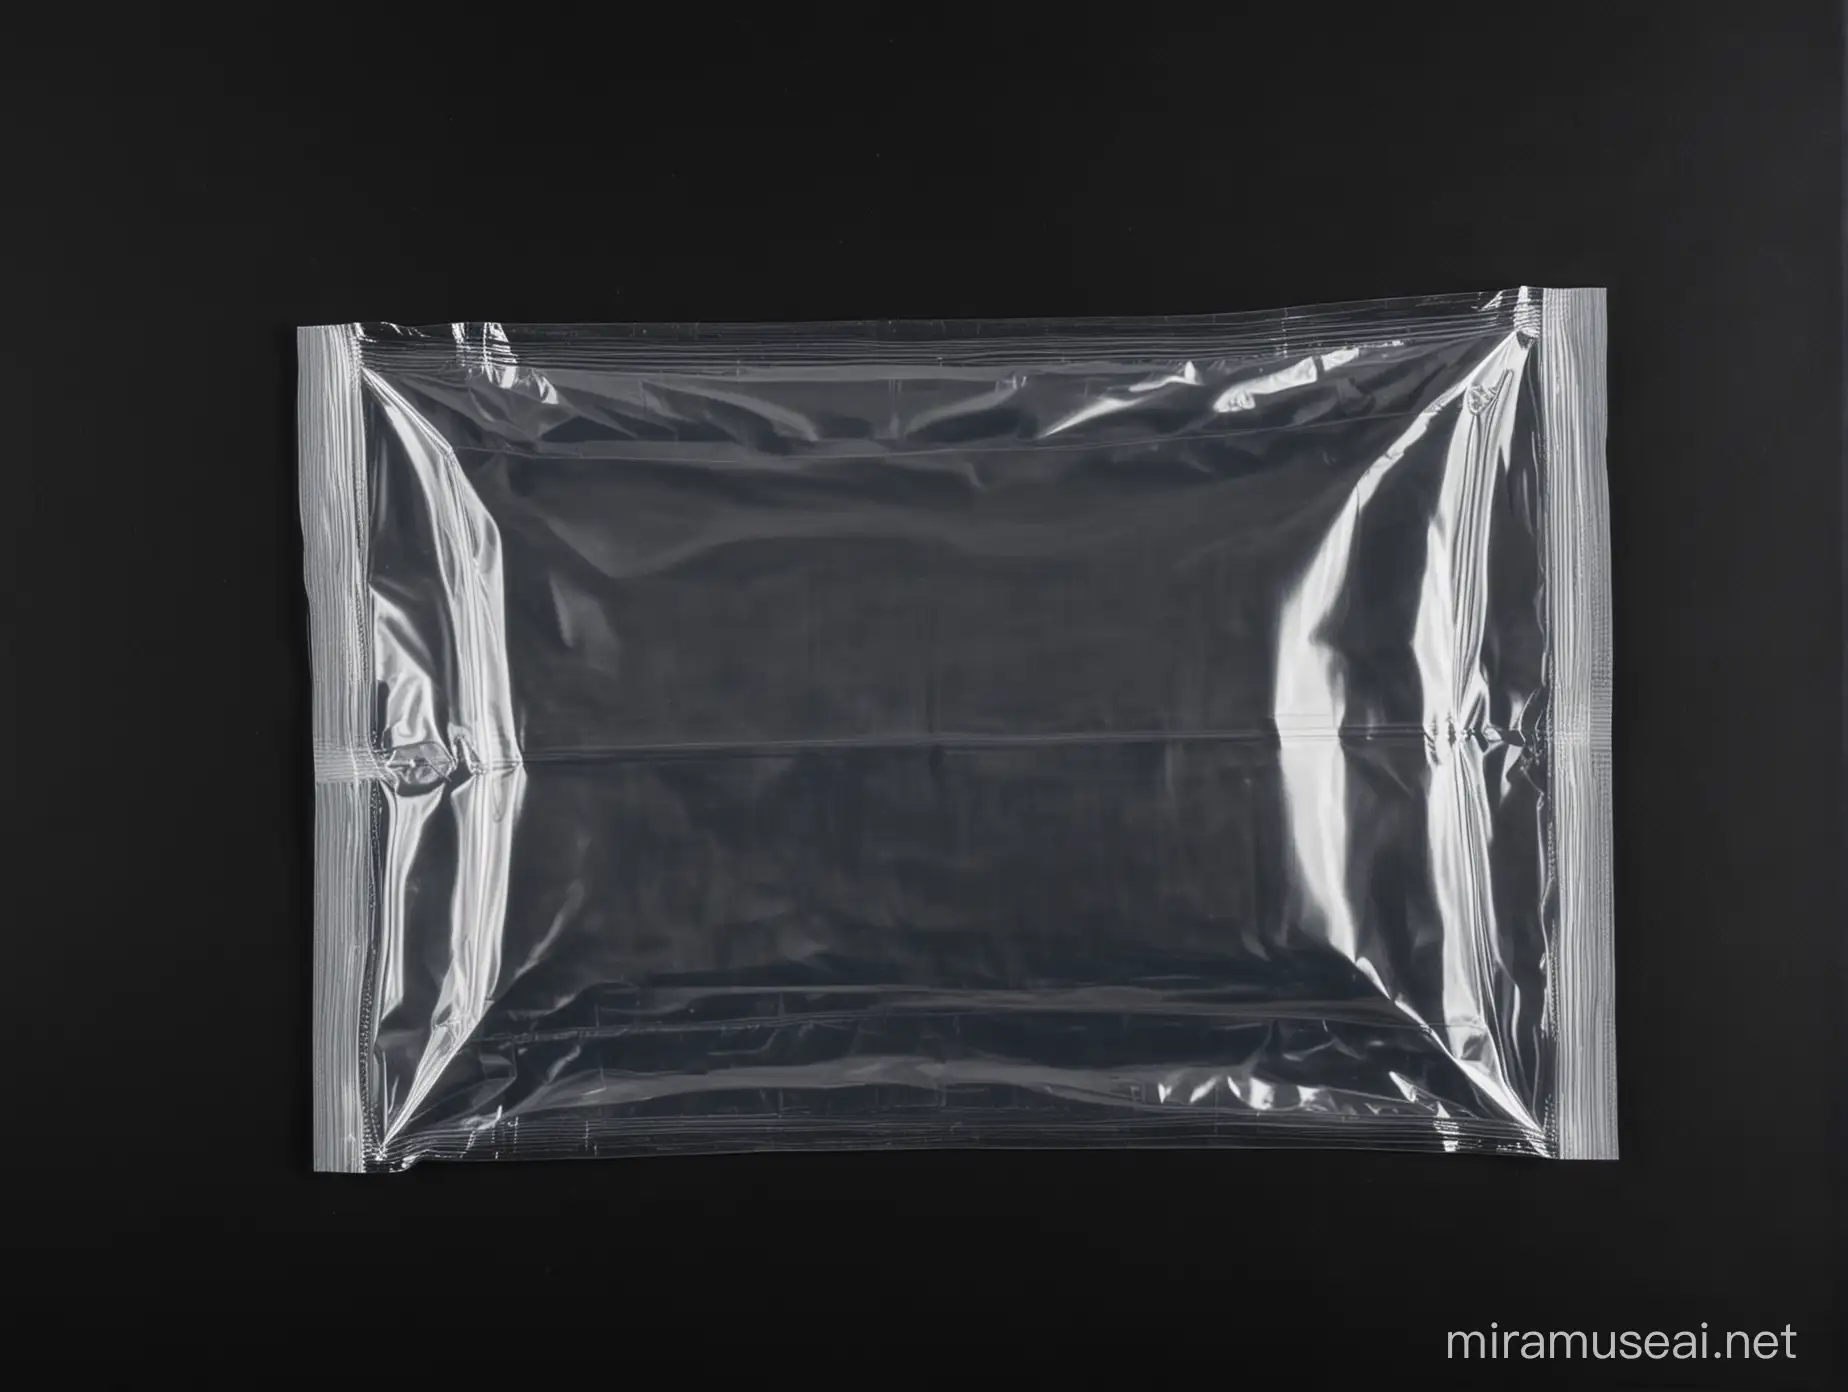  clear plastic bag on a black background. the plastic bag is the shape of a horizontally wide and vertically short rectangle.